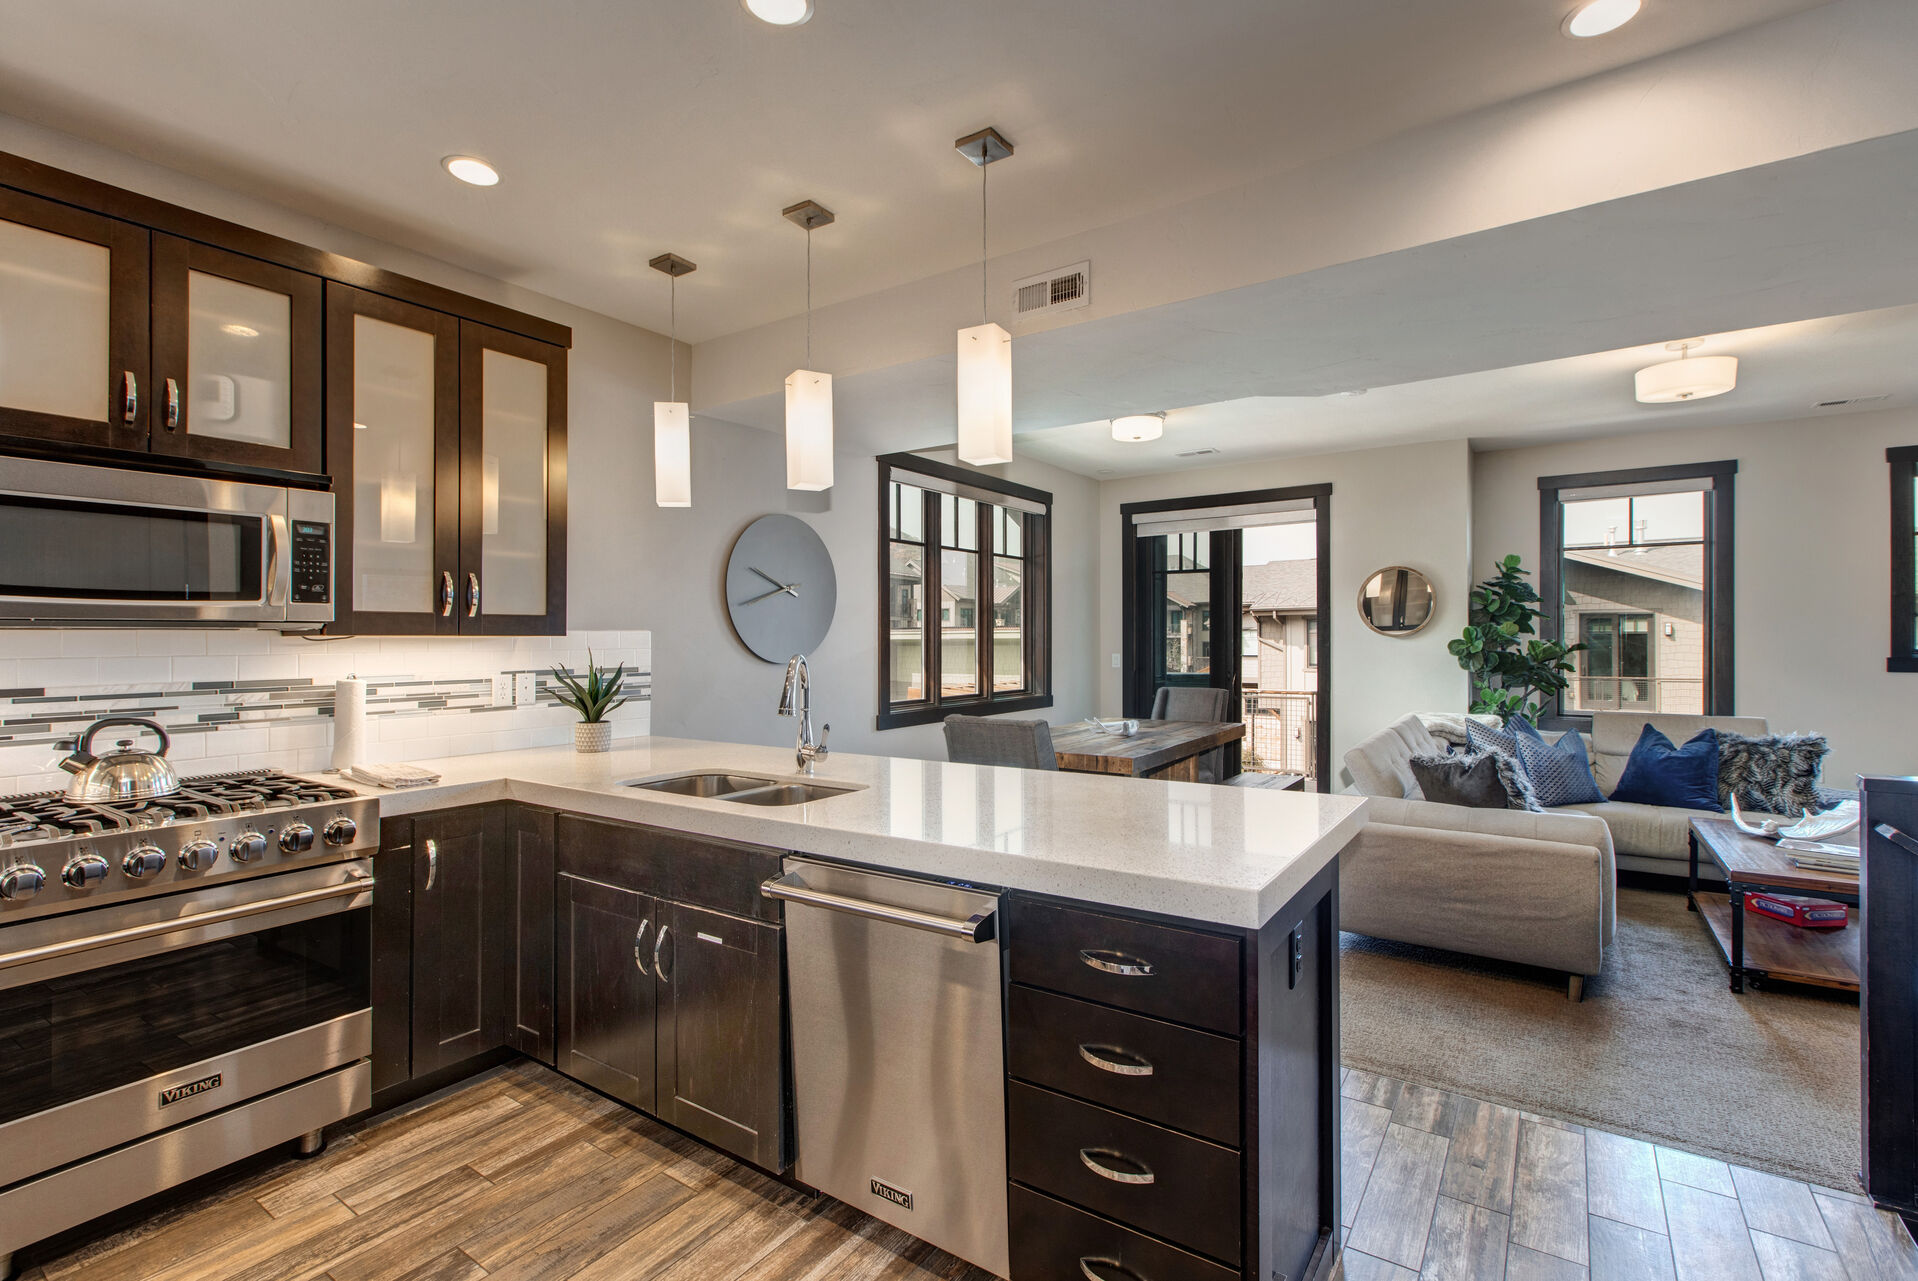 Fully Equipped Gourmet Kitchen with Stone Counters and High-end Stainless Steel Appliances